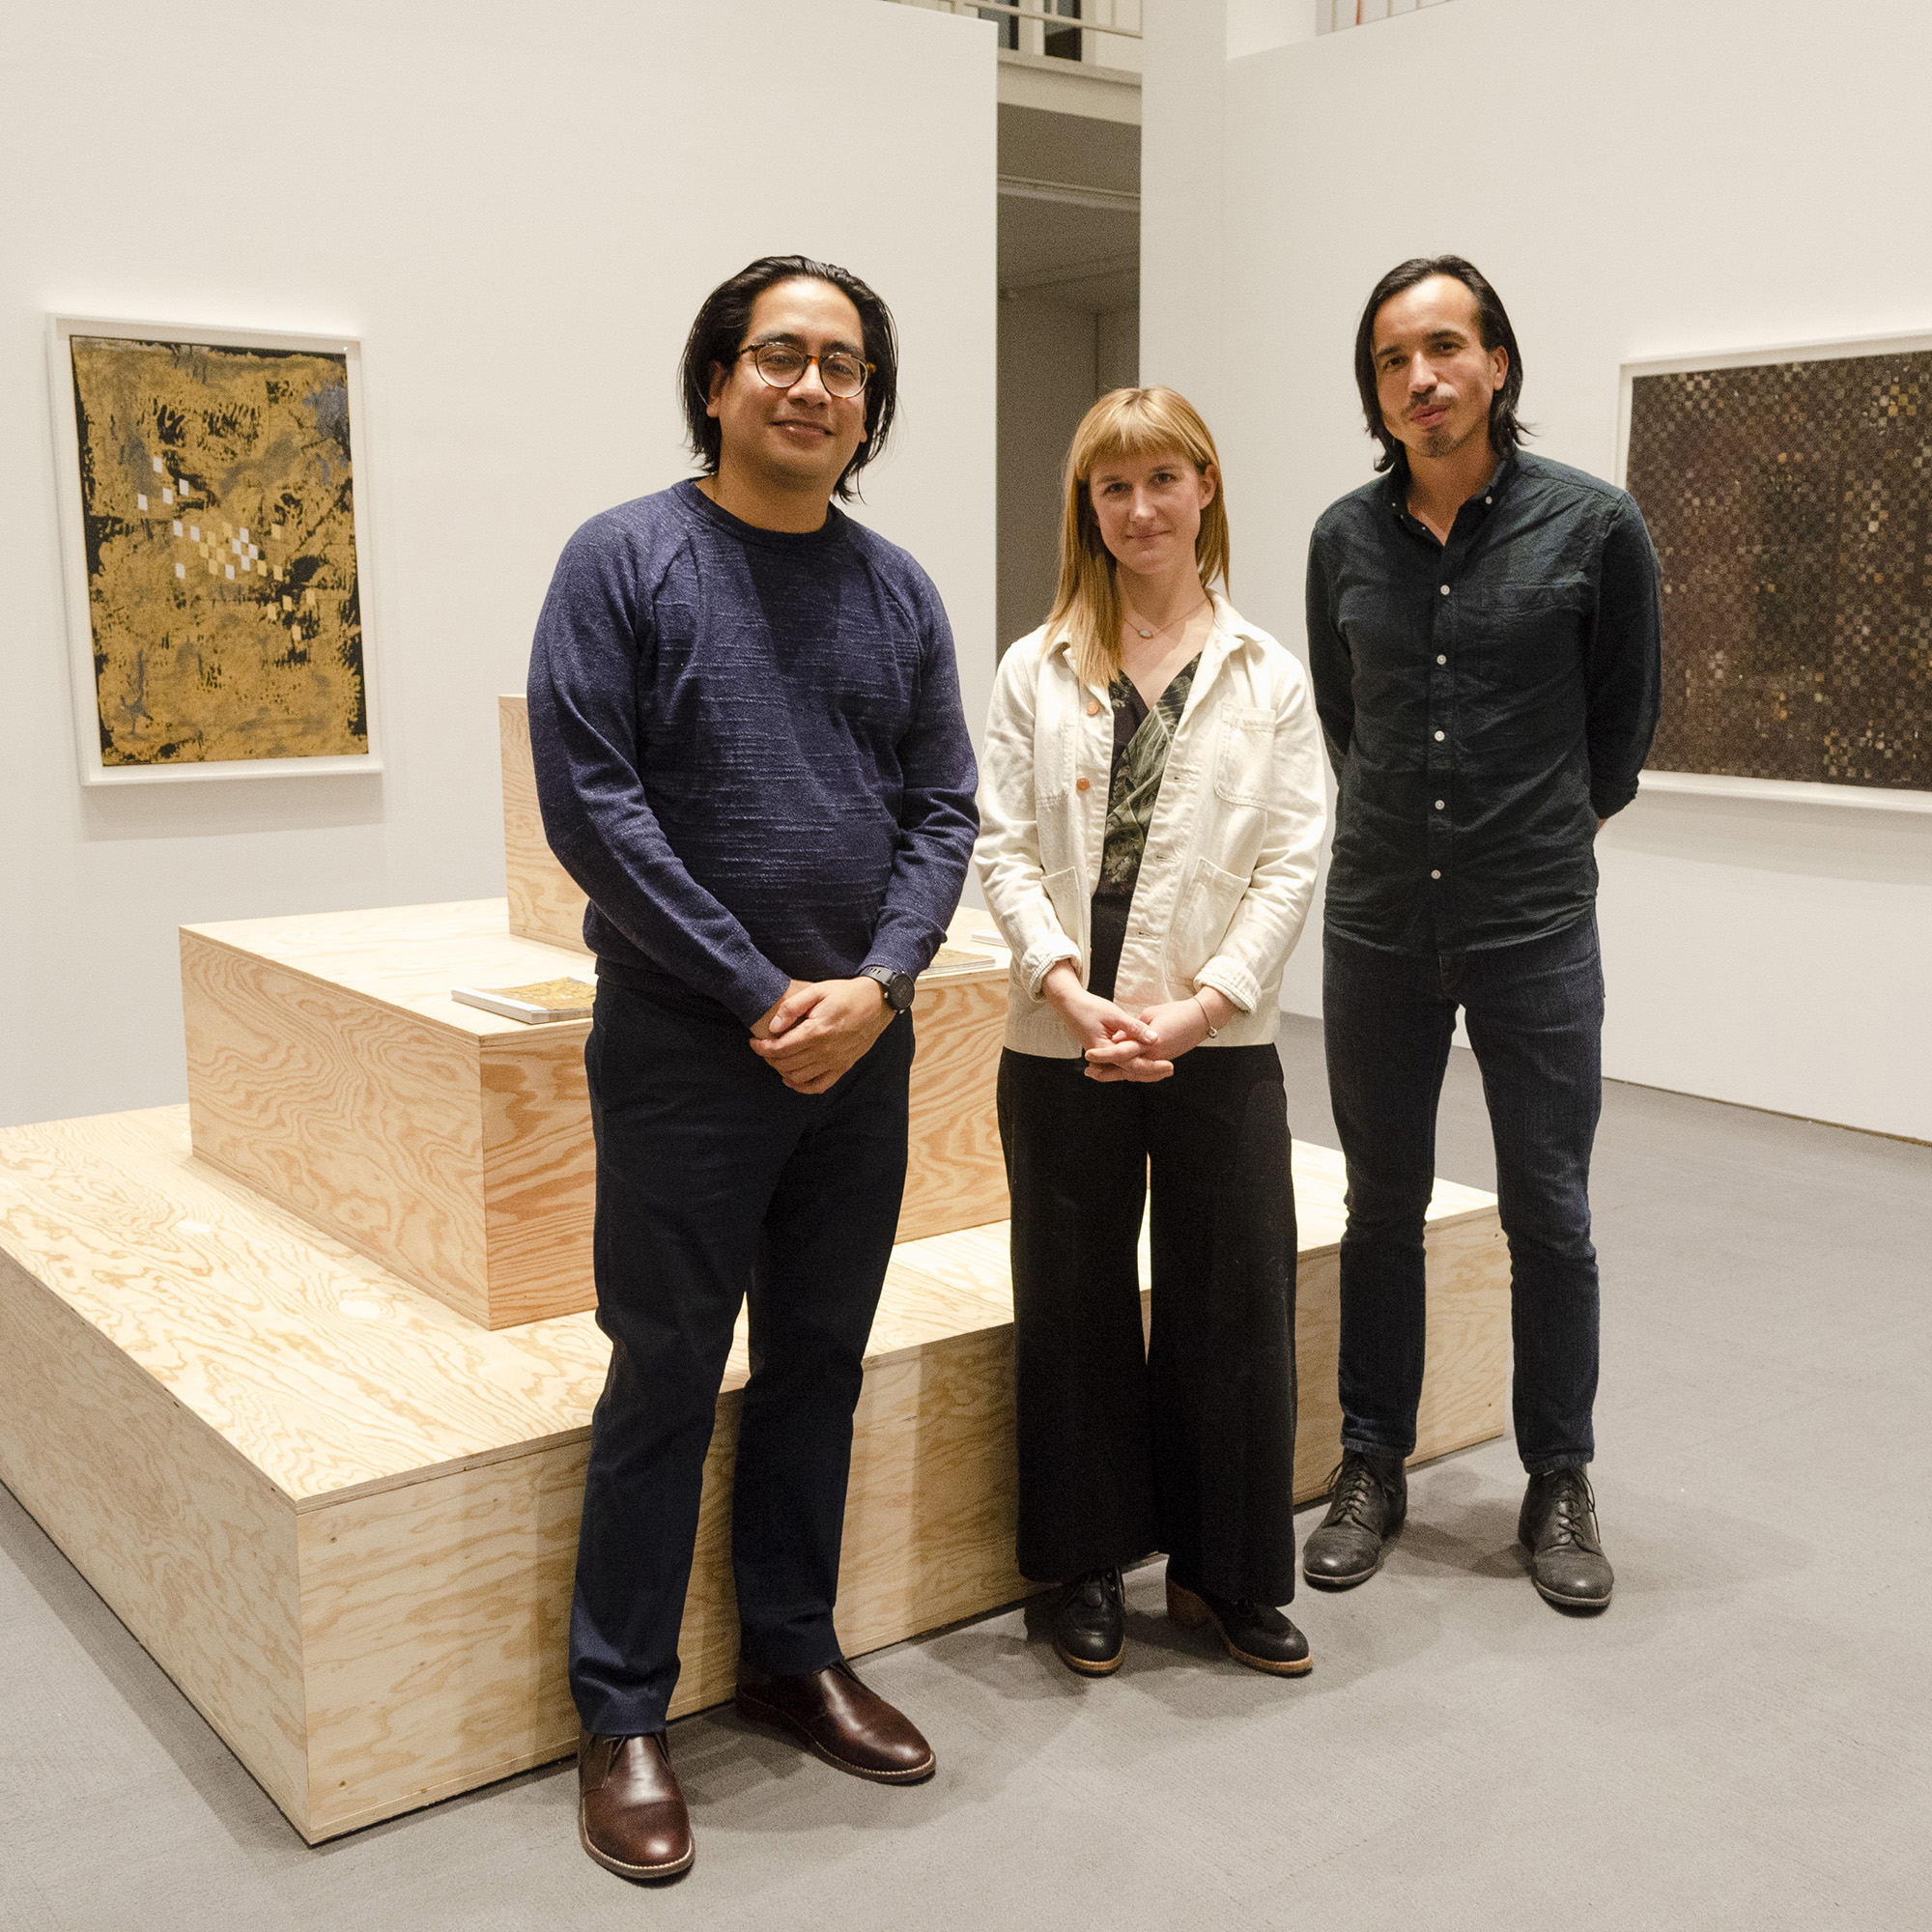 Three artists, Ronny Quevedo, Gracelee Lawrence, and Rodrigo Valenzuela are standing and smiling in front of a large three-tiered plywood sculpture inside the University Art Museum. Two artworks are attached to the wall in the background.